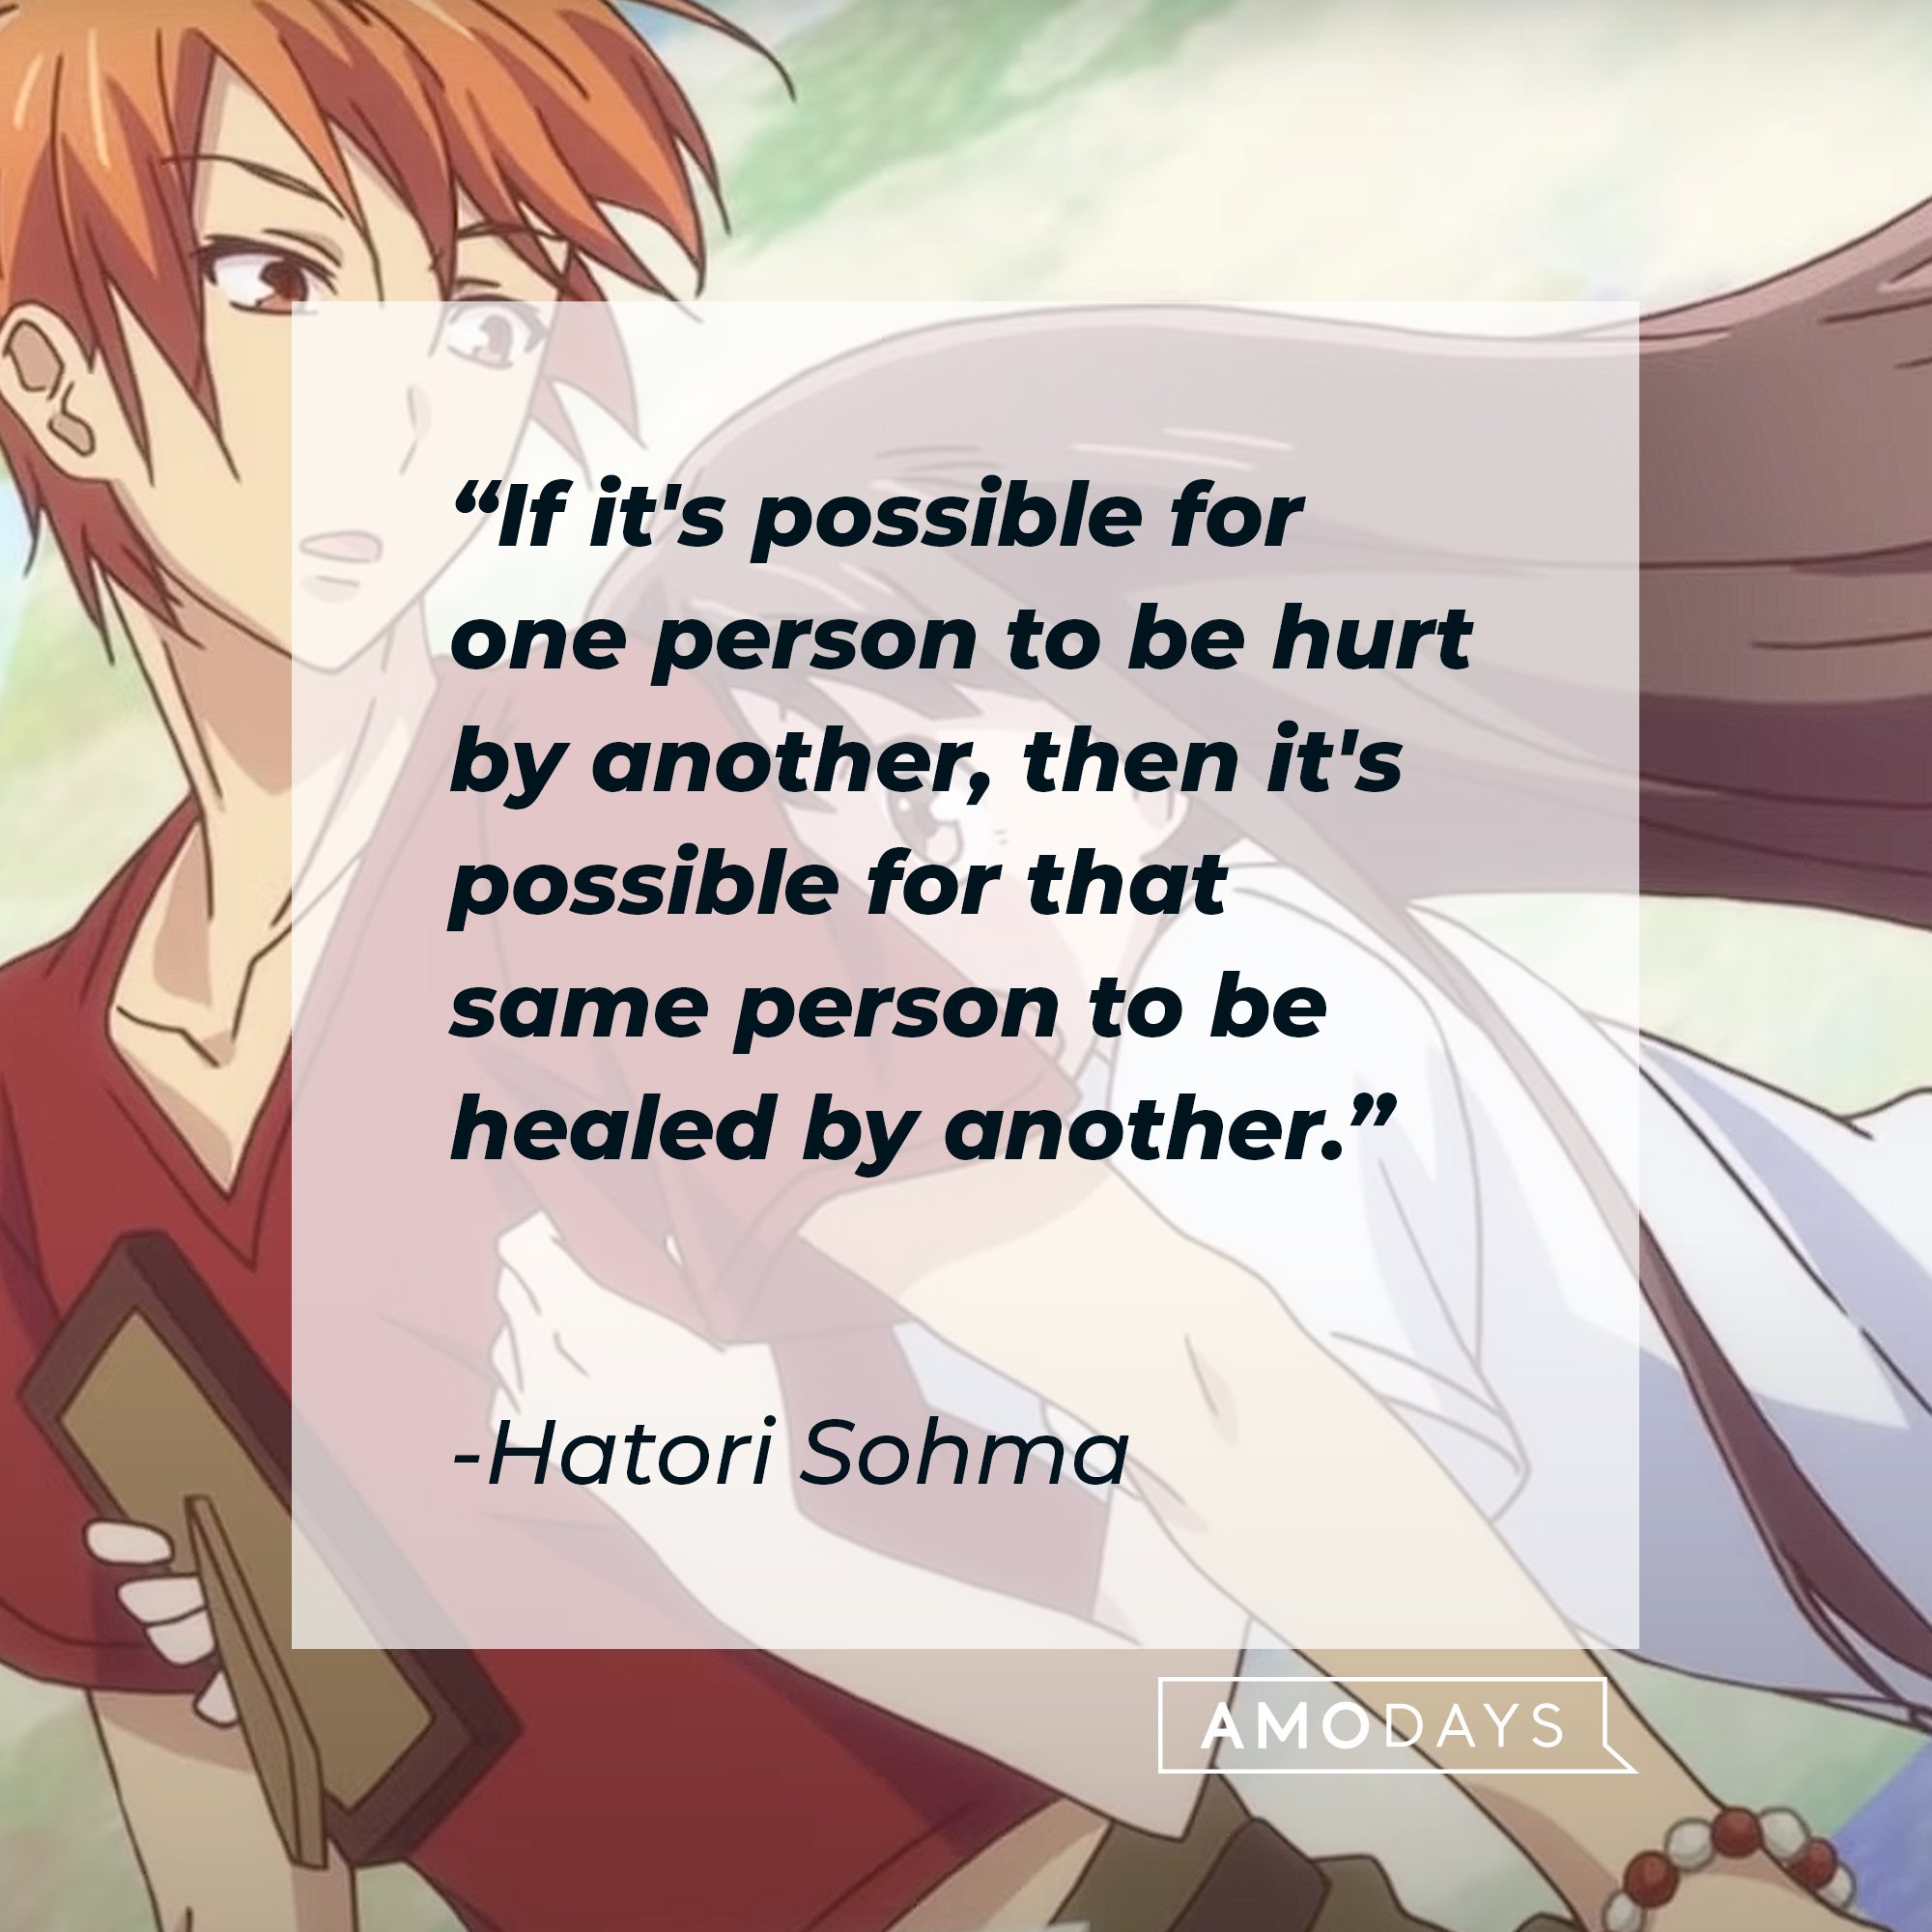 Hatori Sohma's quote: "If it's possible for one person to be hurt by another, then it's possible for that same person to be healed by another." | Image: youtube.com/Crunchyroll Collection